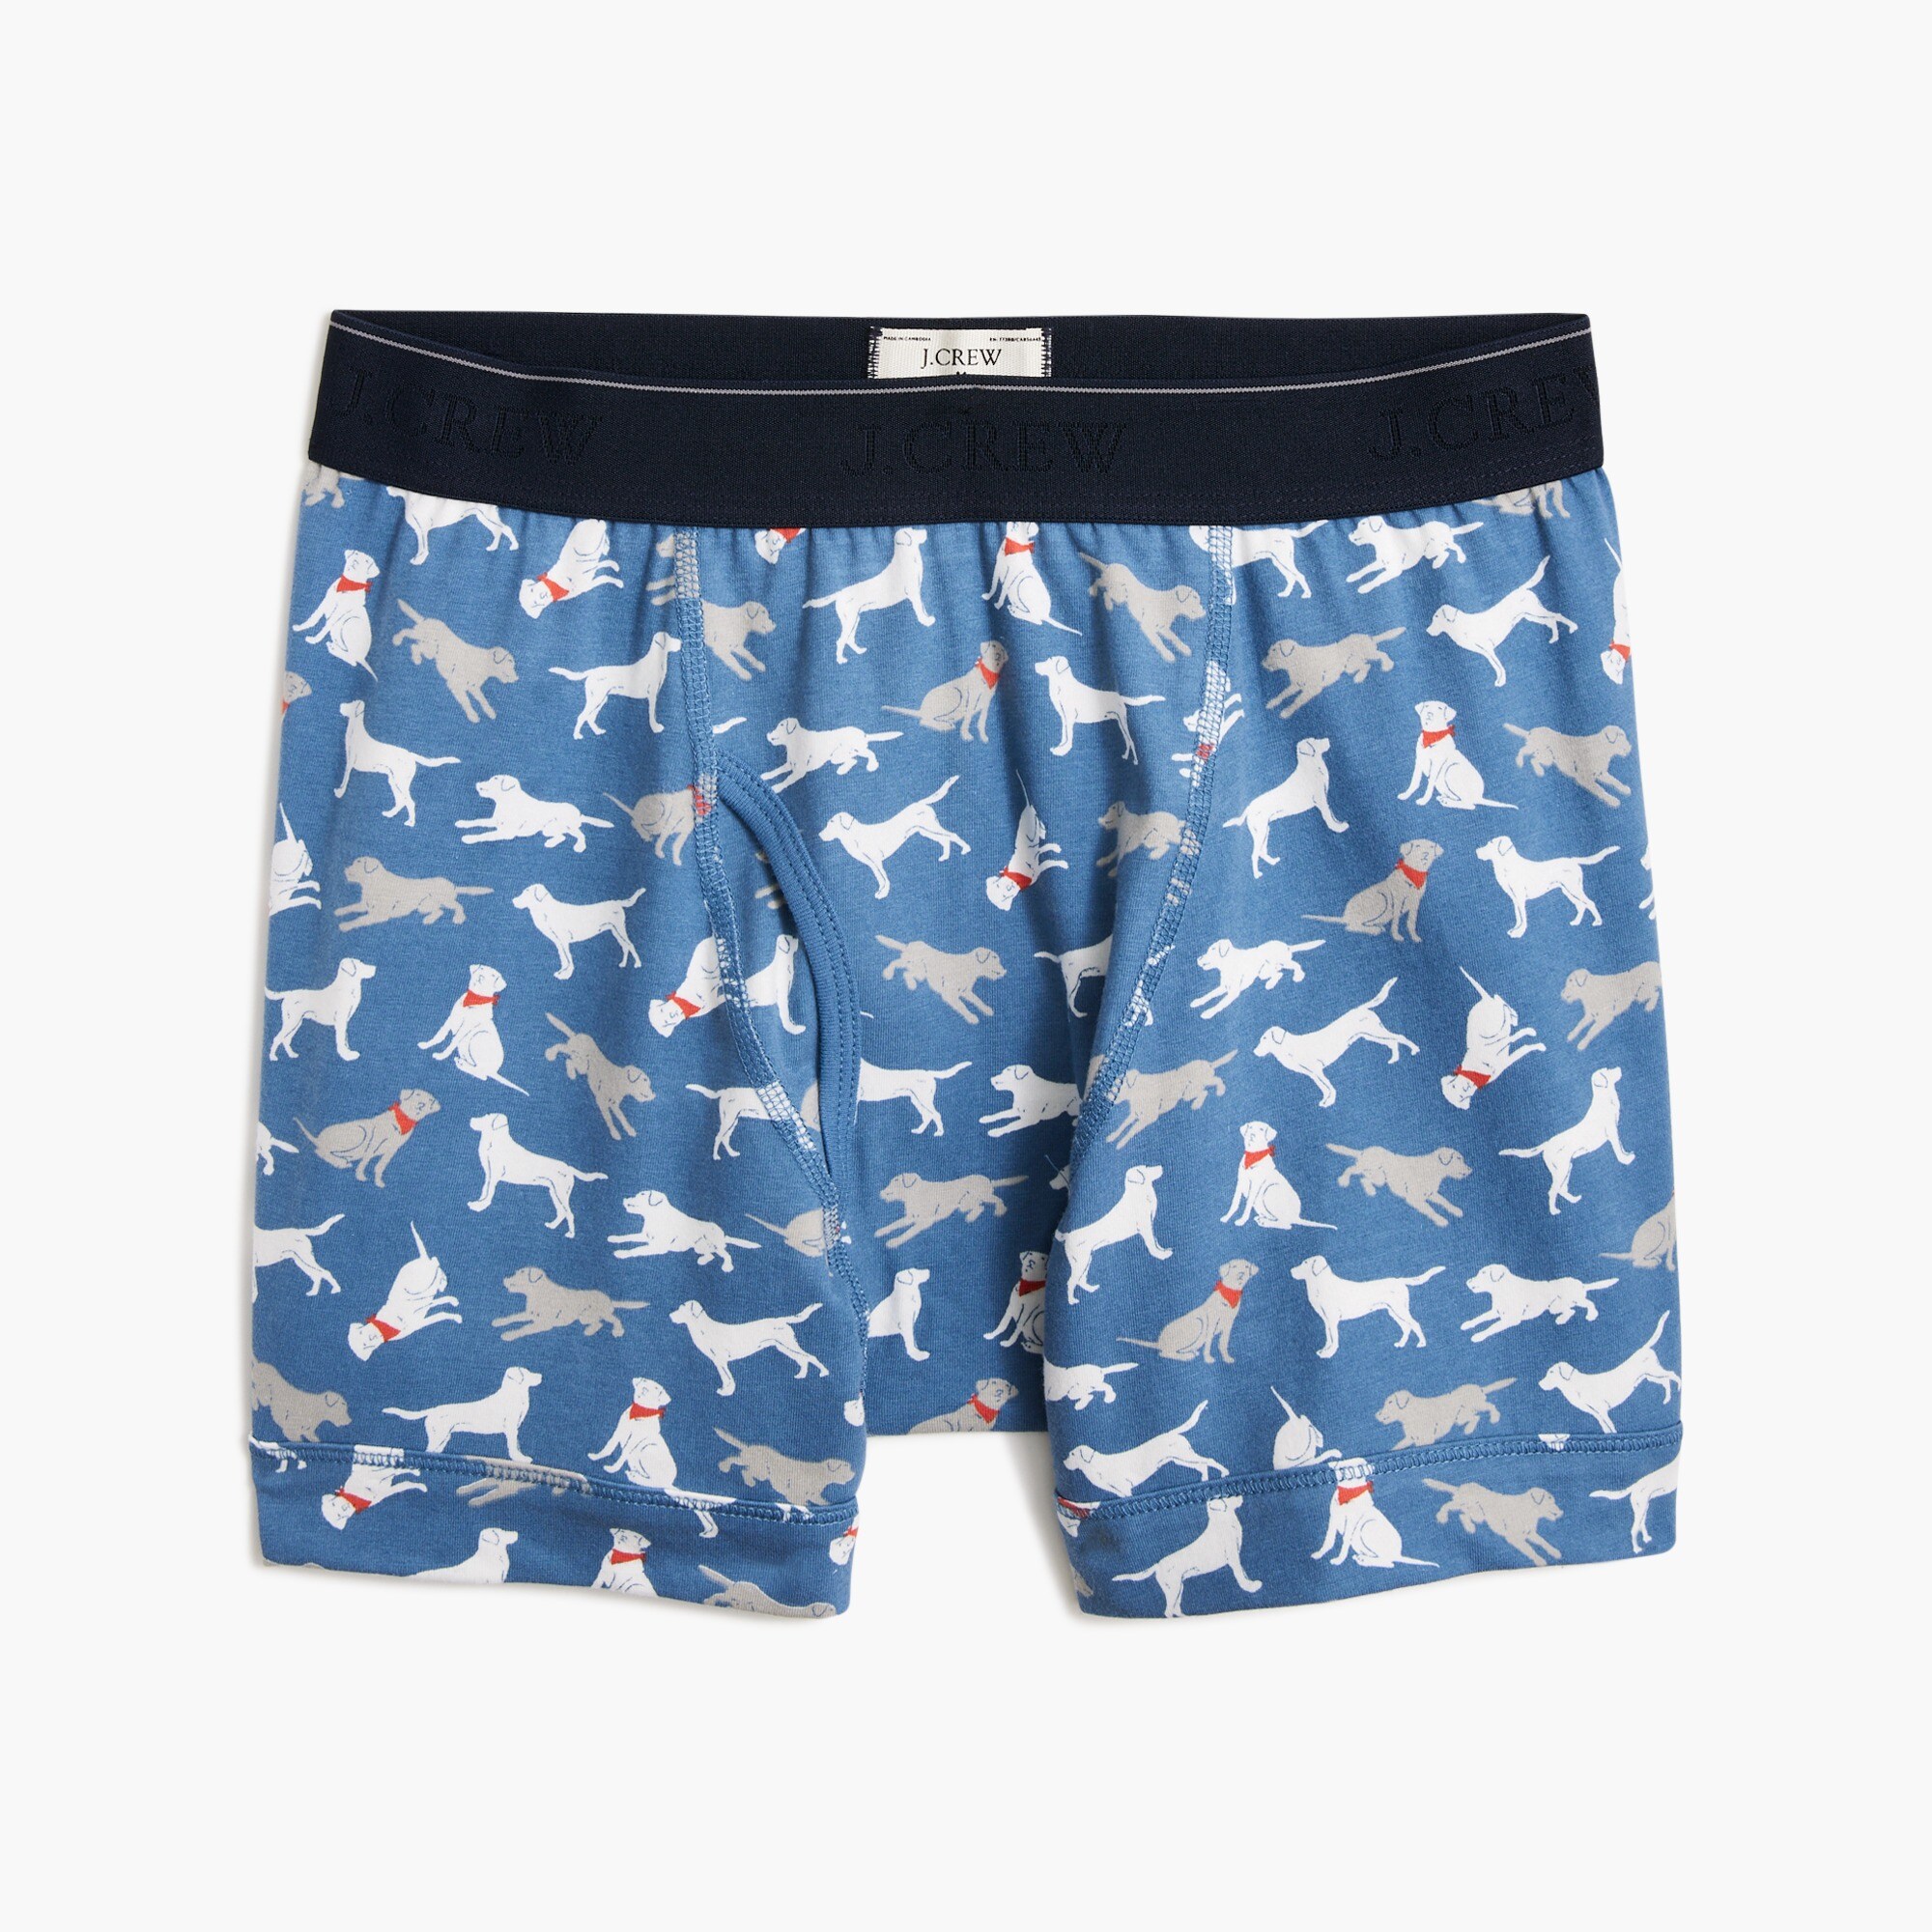  Printed knit boxer briefs